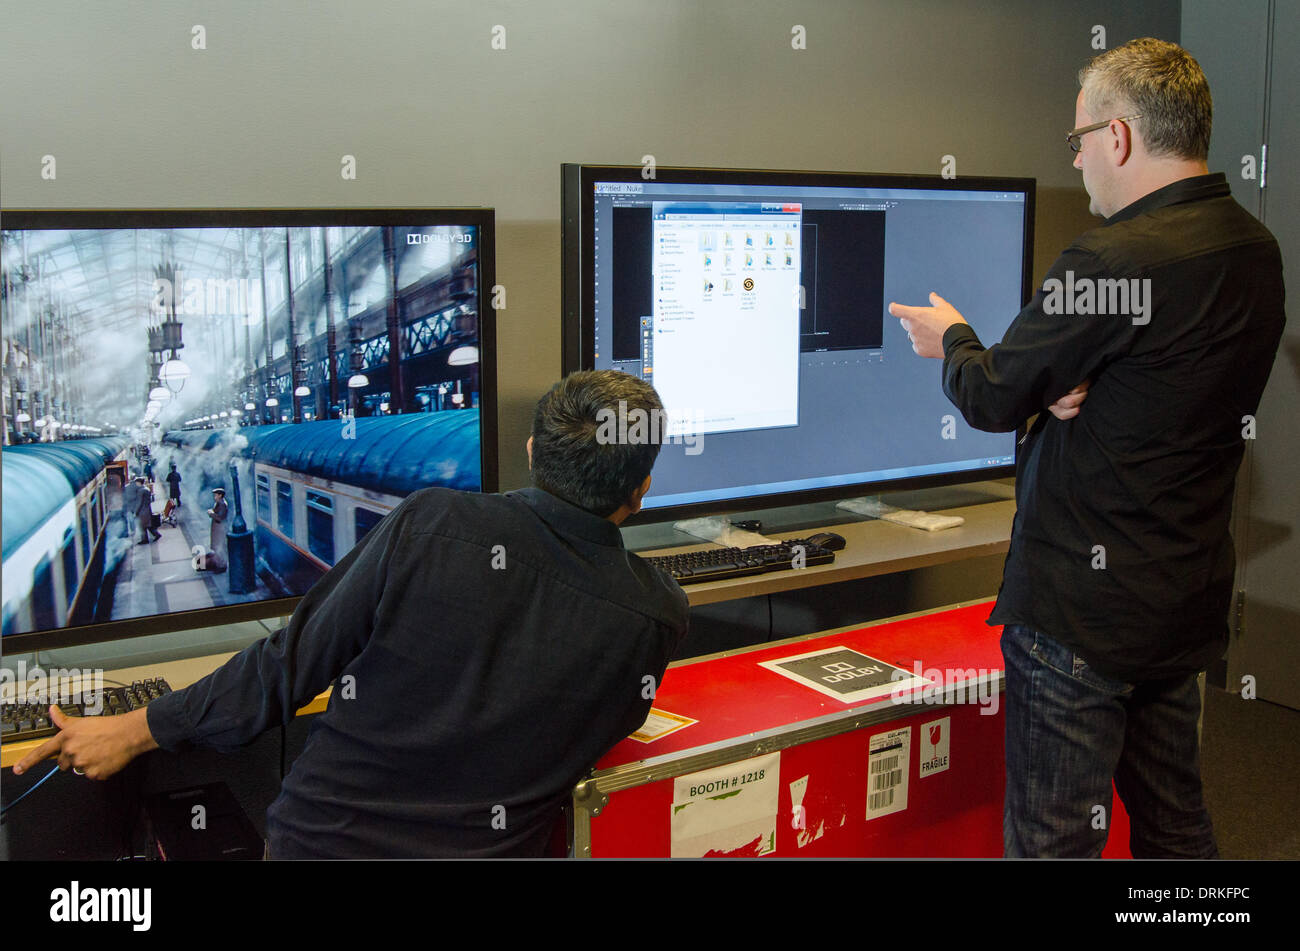 In the company's lab in Sunnyvale, CA, Dolby manager Roland Vlaicu (right) and engineer Prasad Balasubramanian take a close look at the software settings for the new Dolby 3D technology, which enables watching television in 3D without glasses. - 2013. Stock Photo